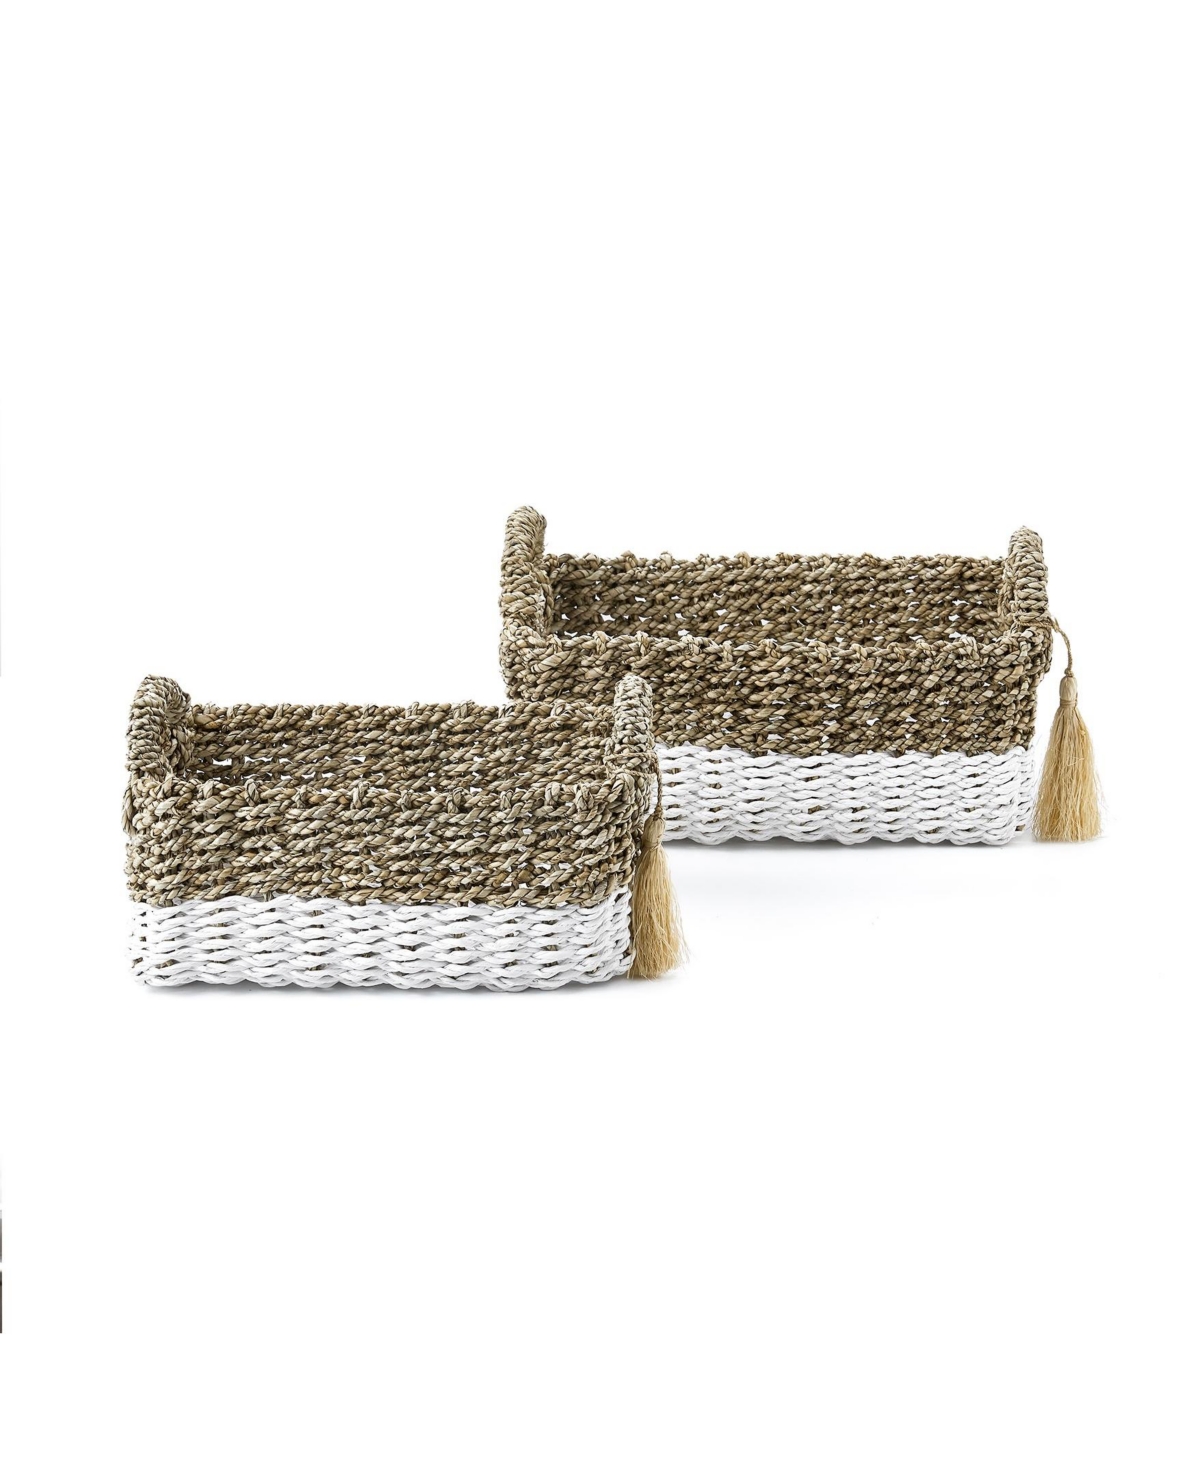 Baum 2 Piece Large Rectangular Sea Grass And Raffia Bins Set With Ear Handles And Single Tassel In Natural And White